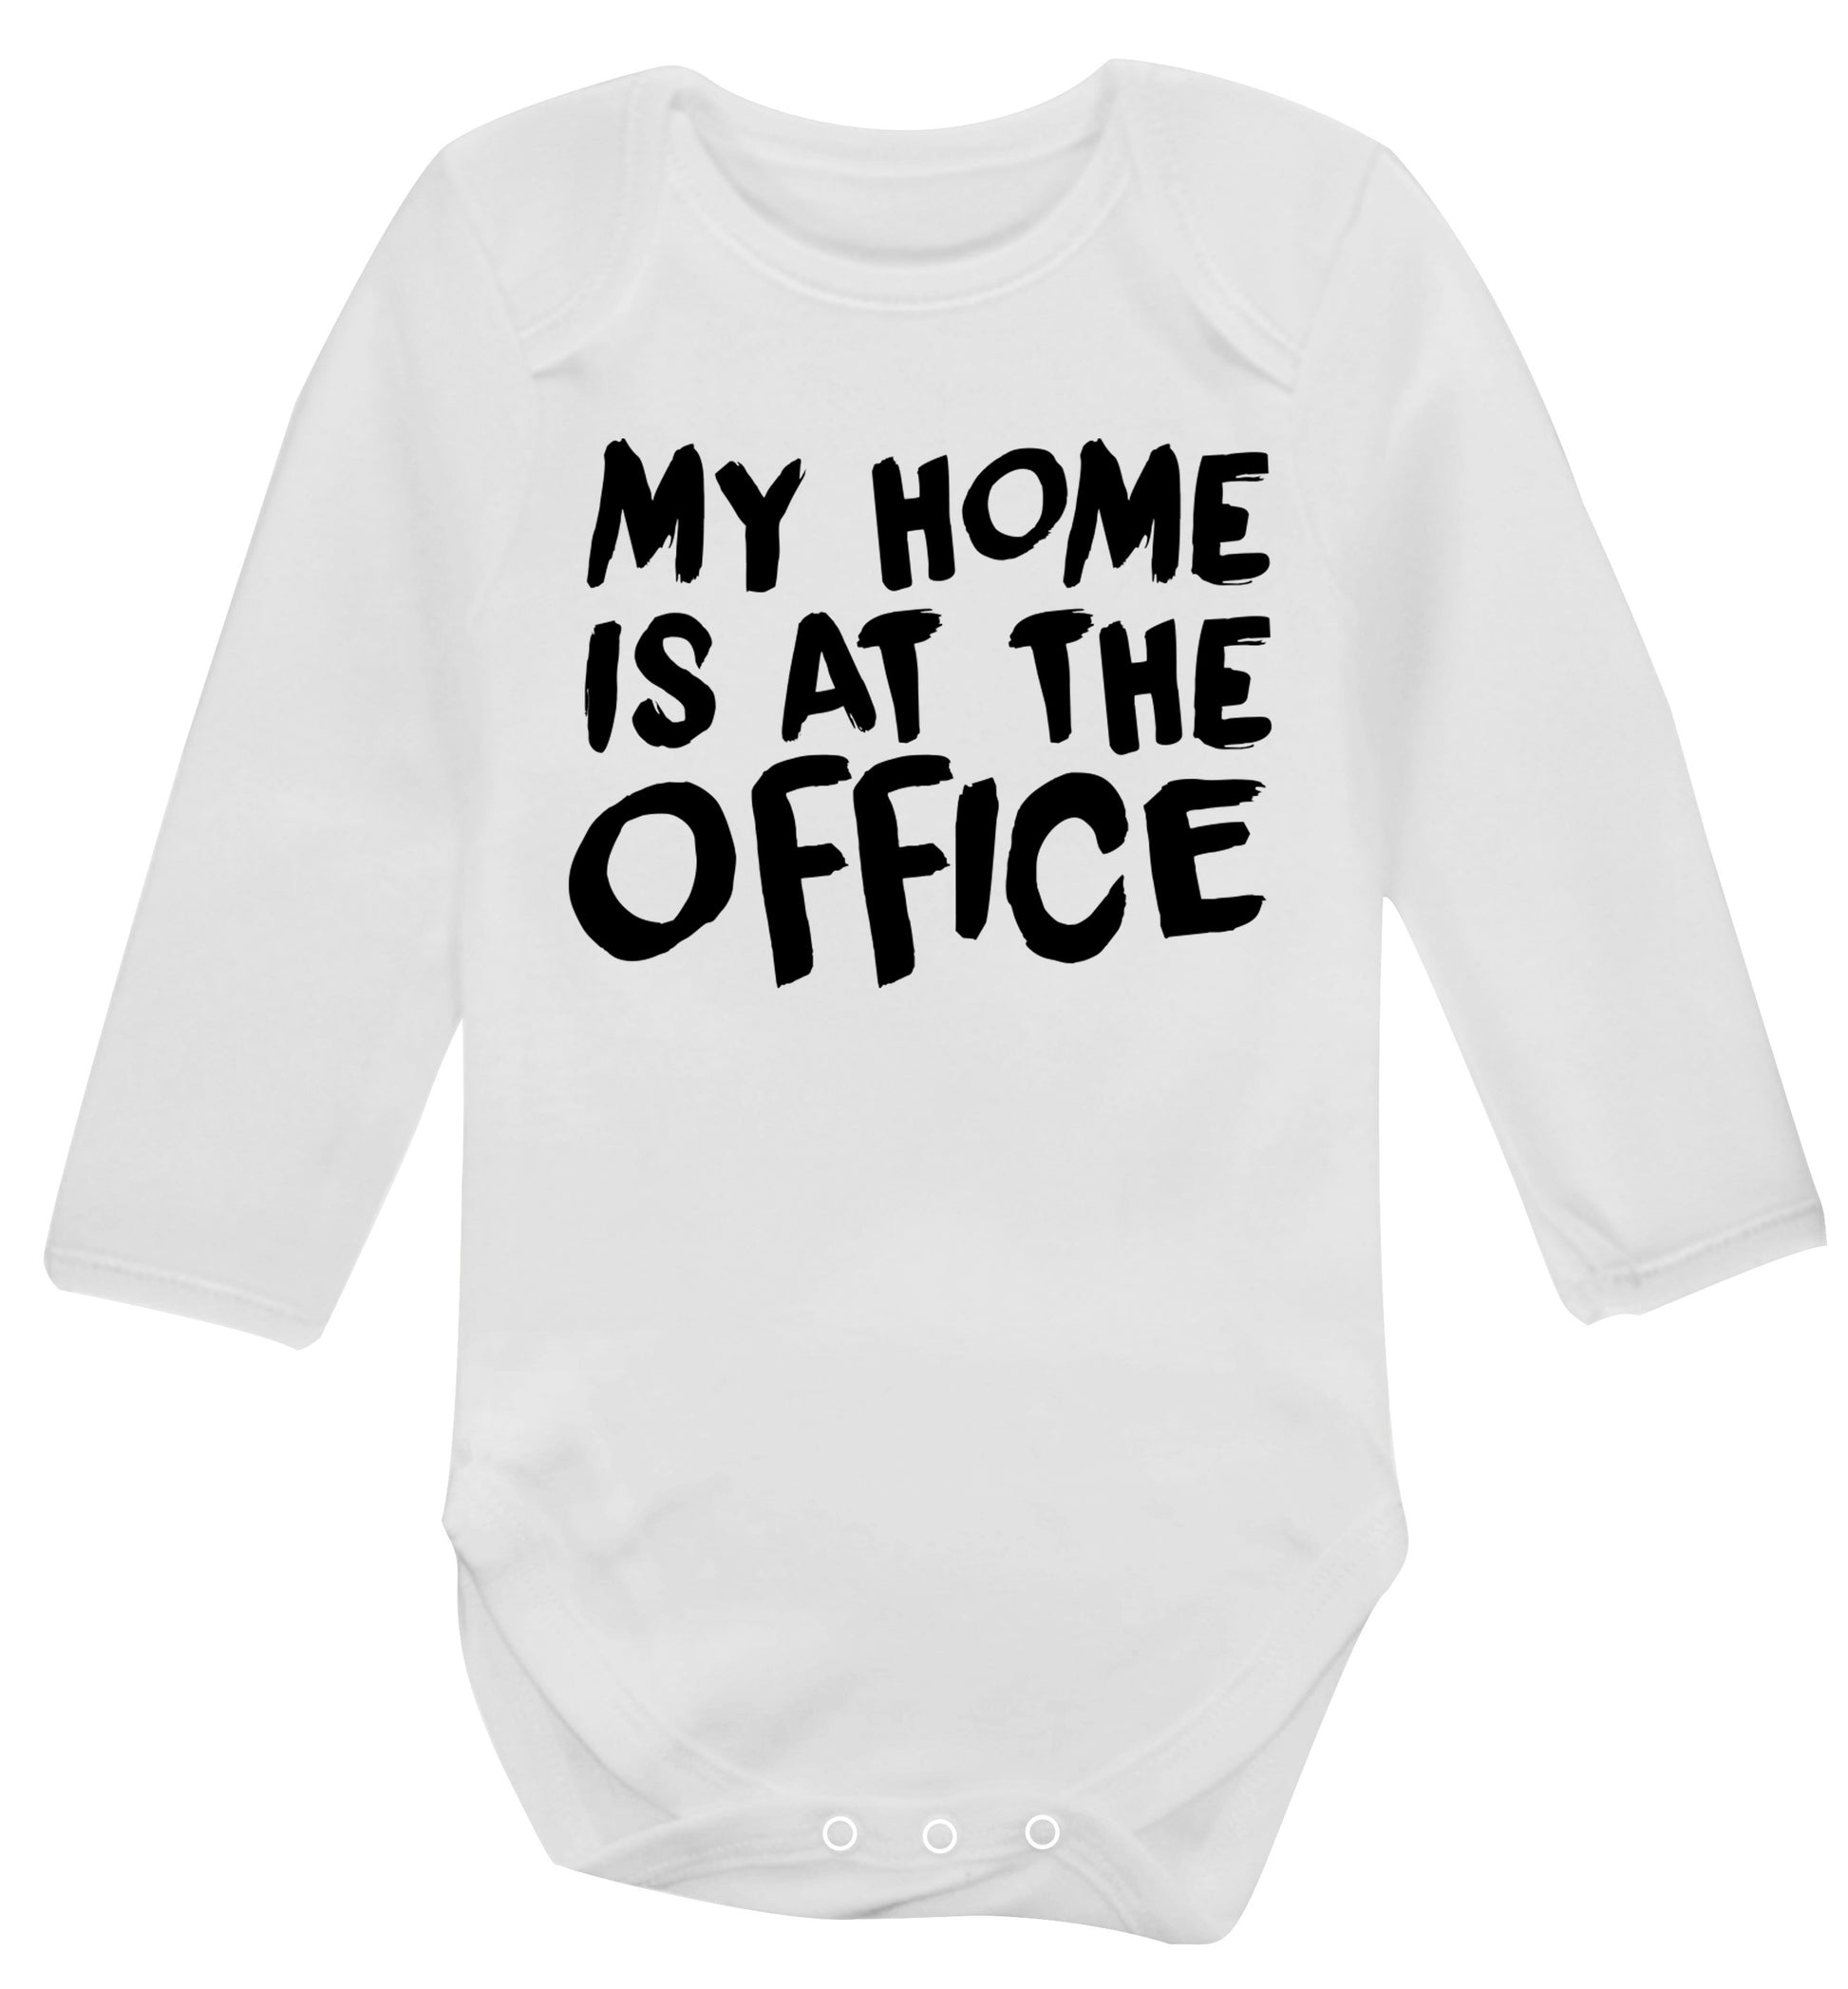 My home is at the office Baby Vest long sleeved white 6-12 months